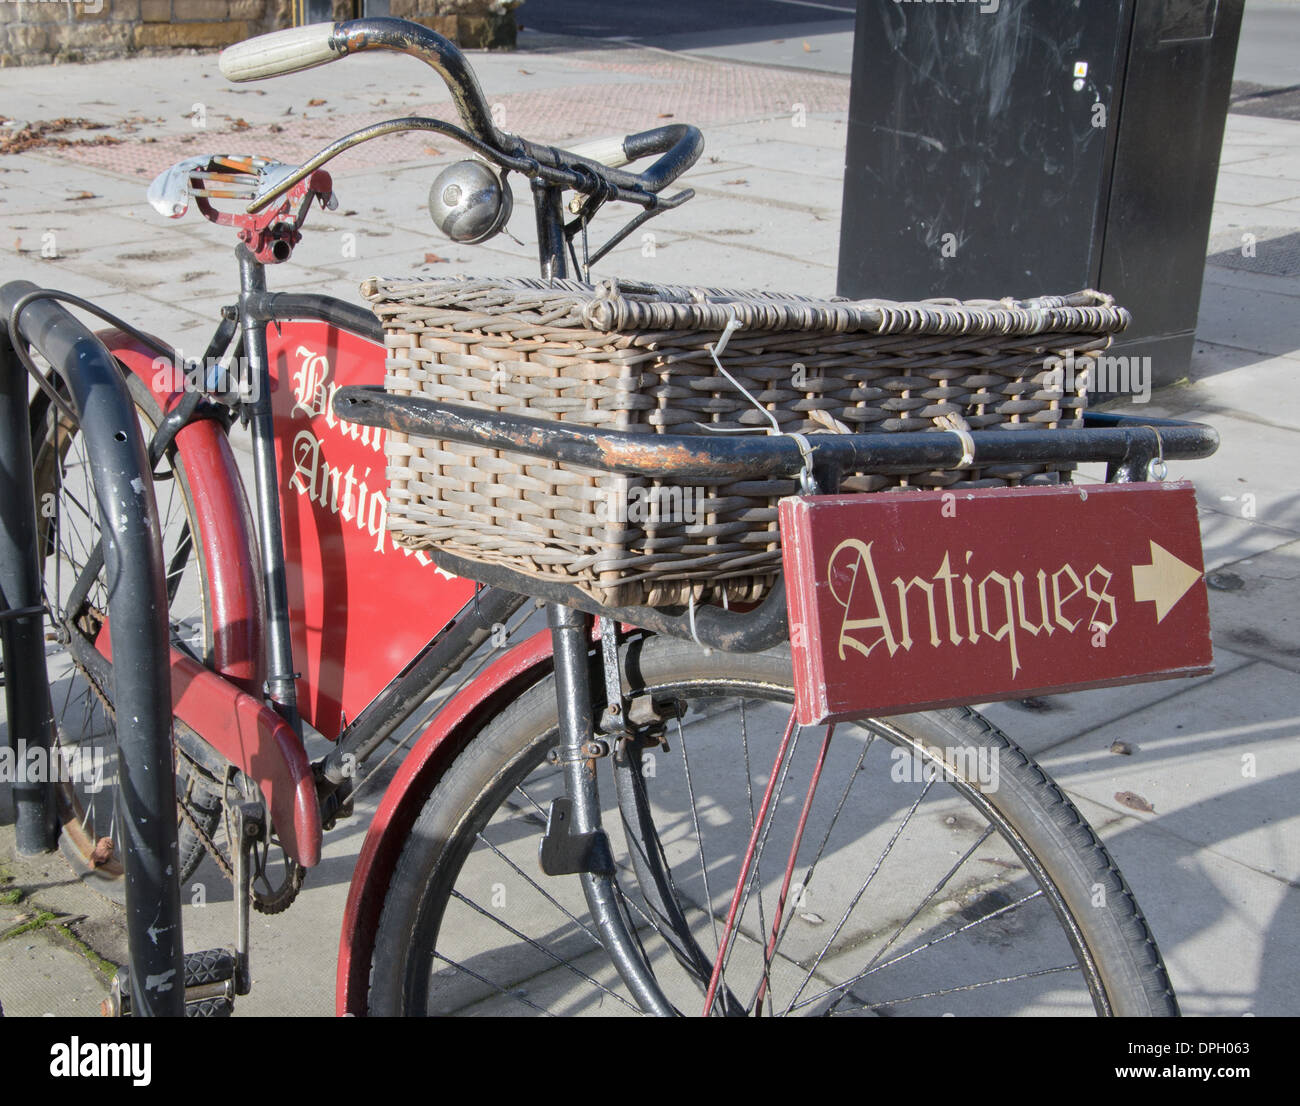 Classic push bike used to promote local antiques shop Stock Photo